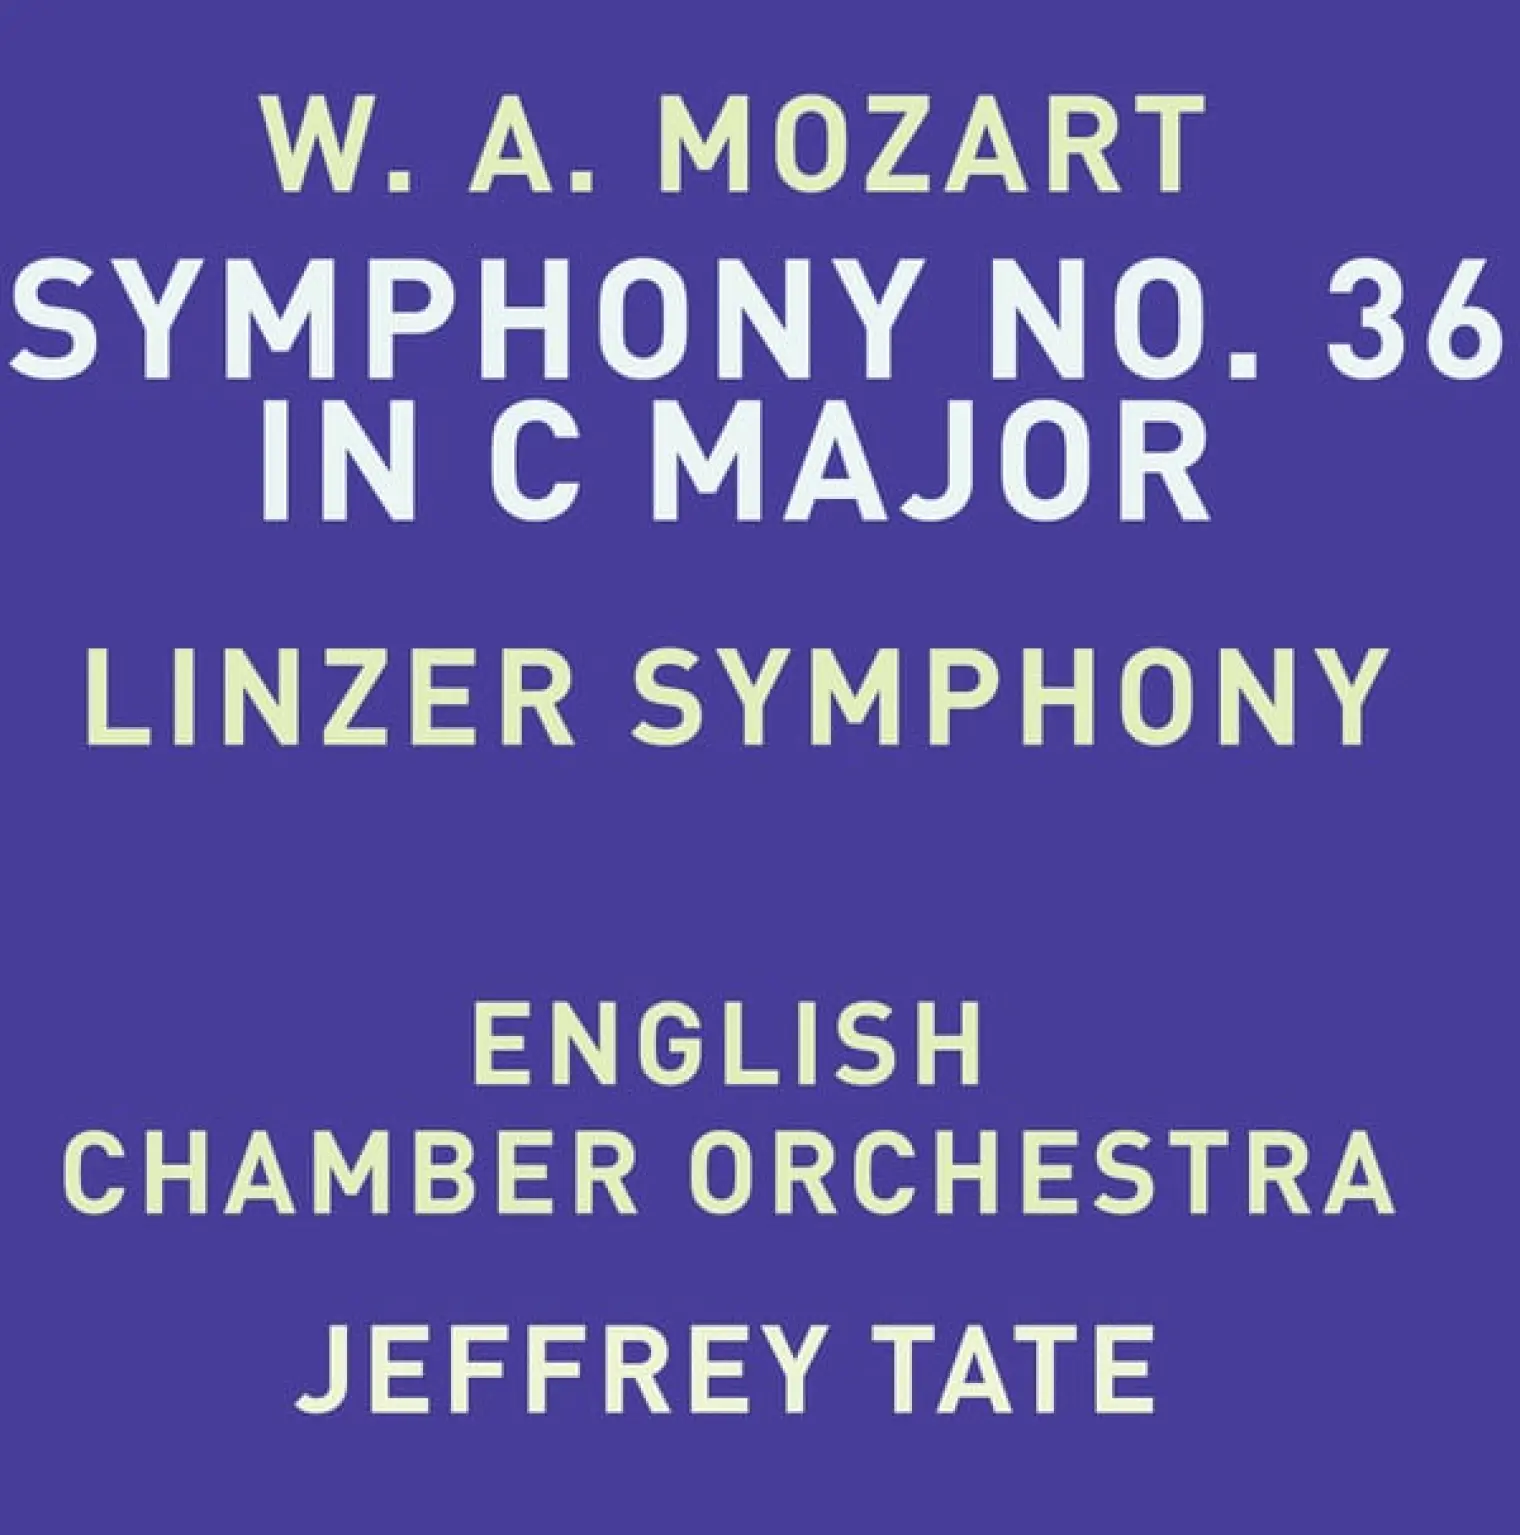 Mozart: Symphony No. 36 in C Major, K. 425 "Linz" -  English Chamber Orchestra 